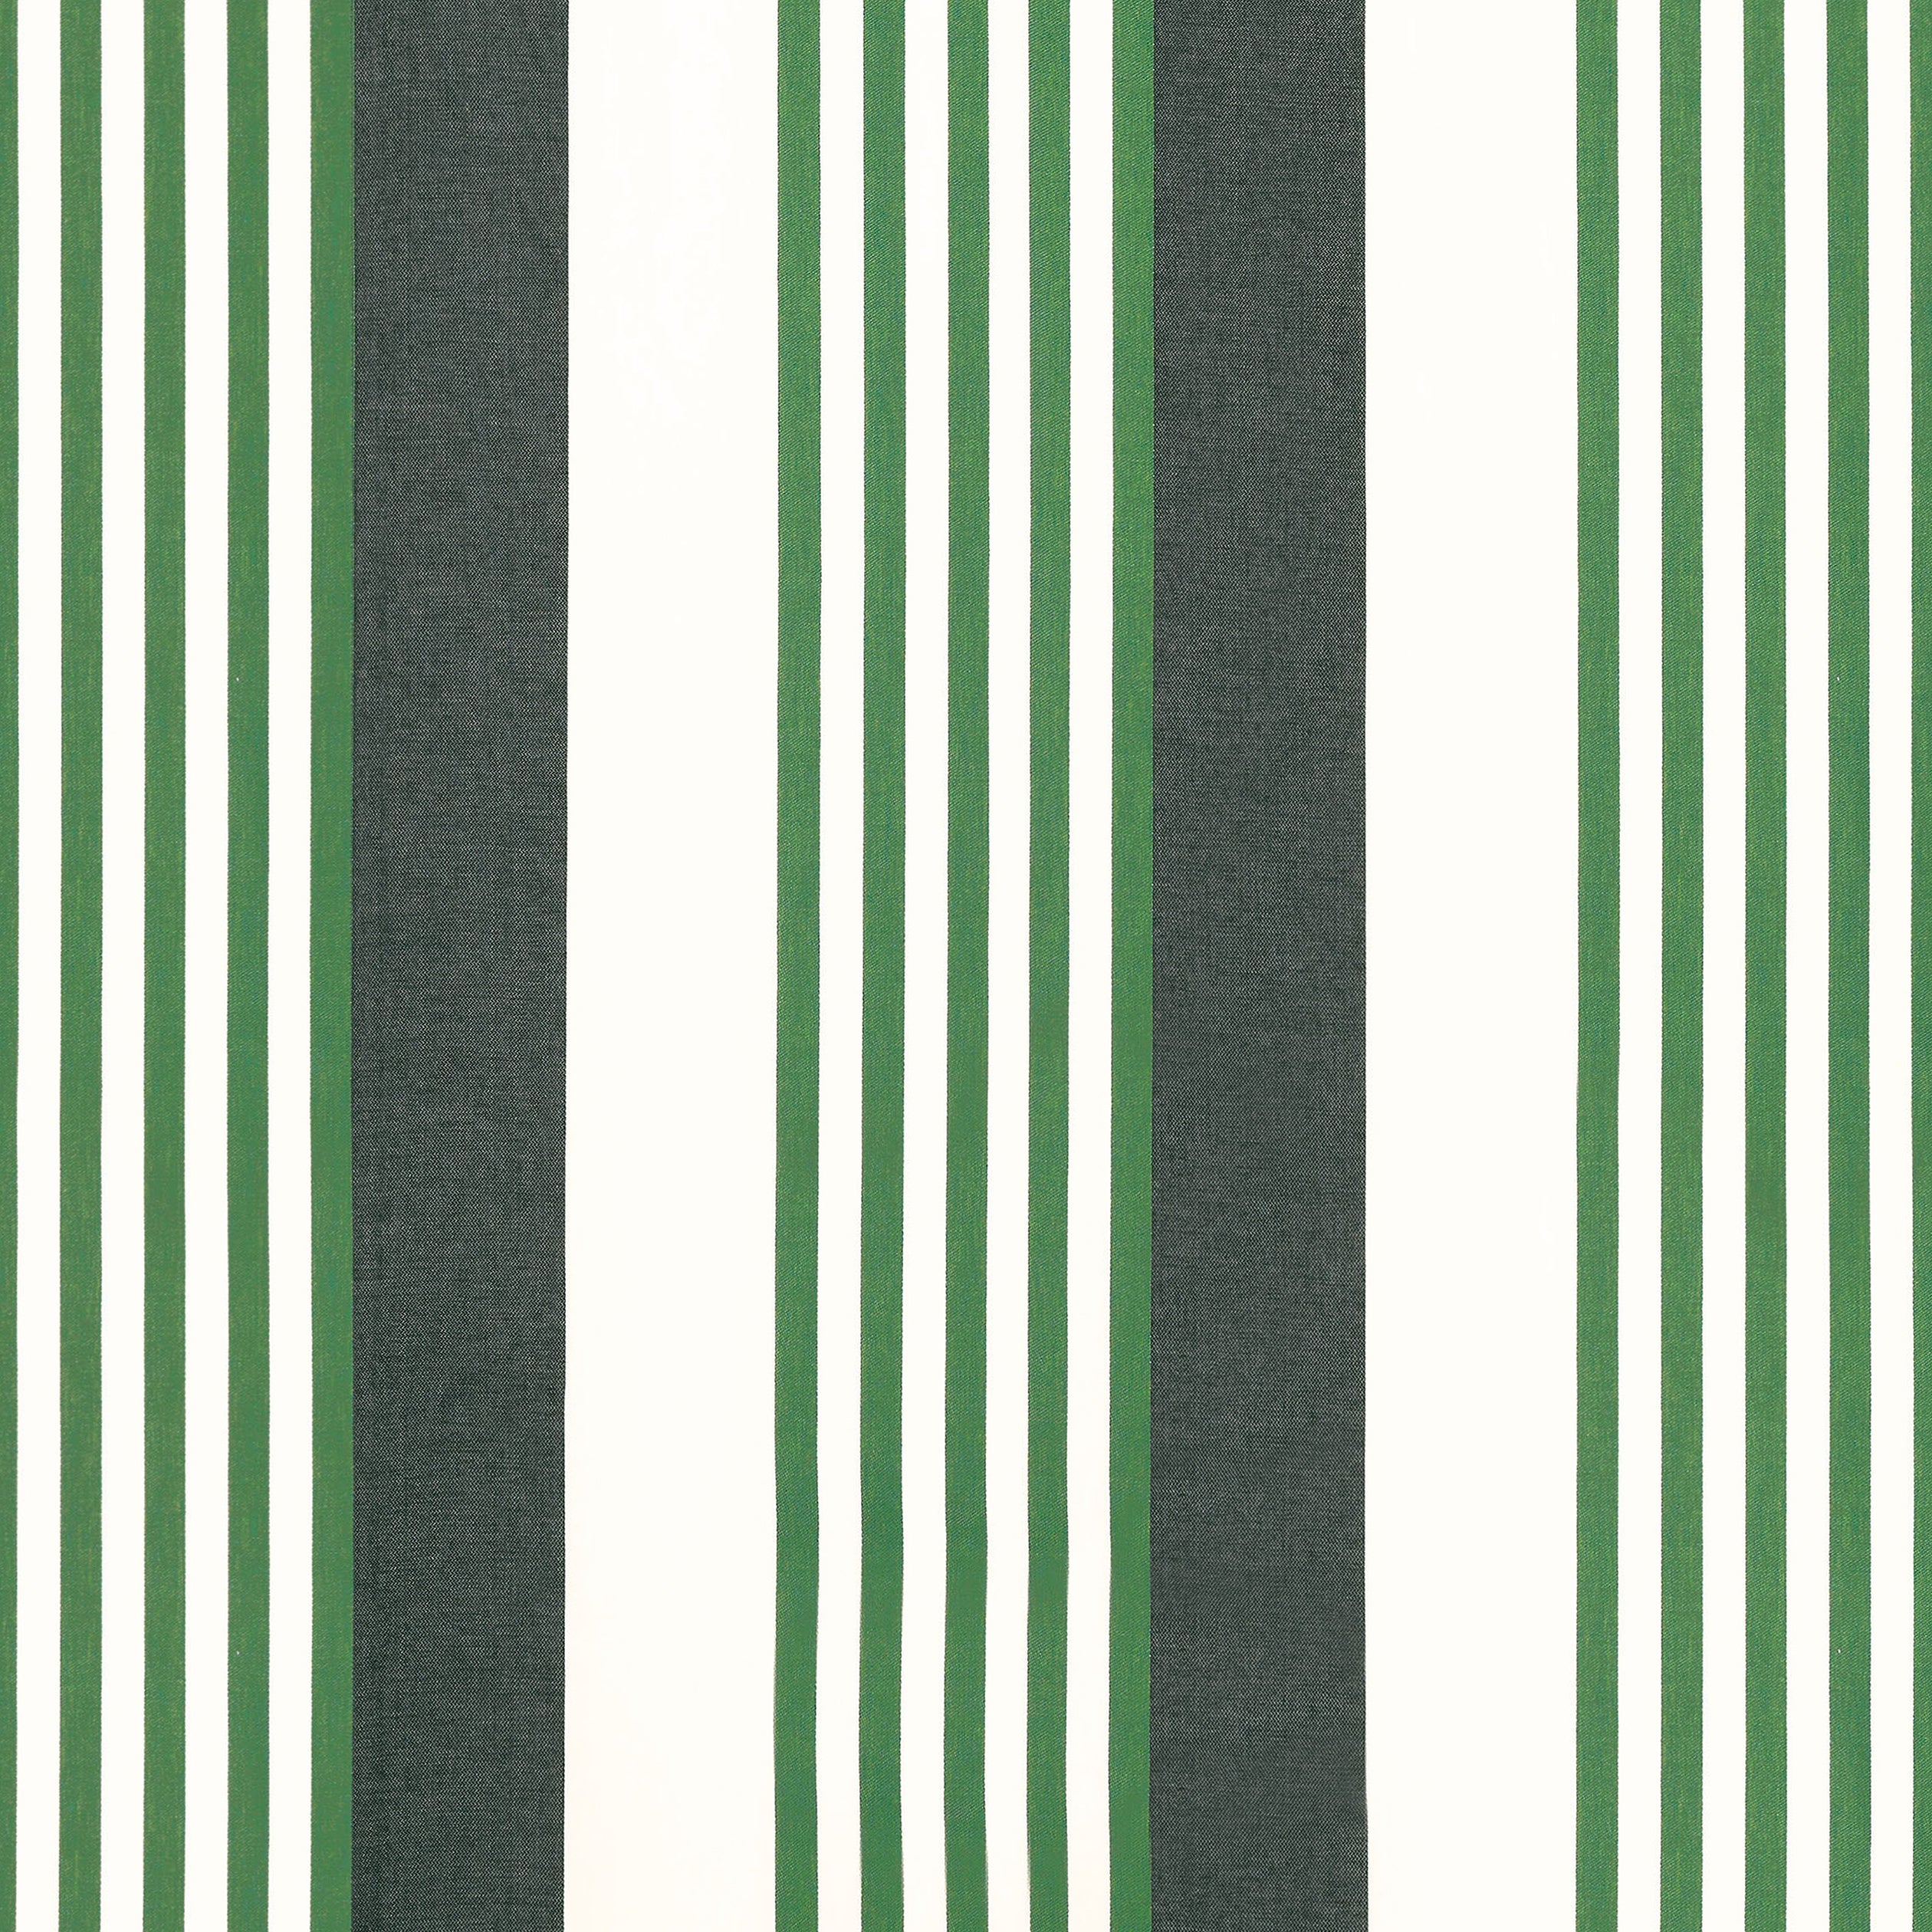 Riviera Stripe fabric in onyx and kelly color - pattern number FWW81770 - by Thibaut in the Locale Wide Width collection